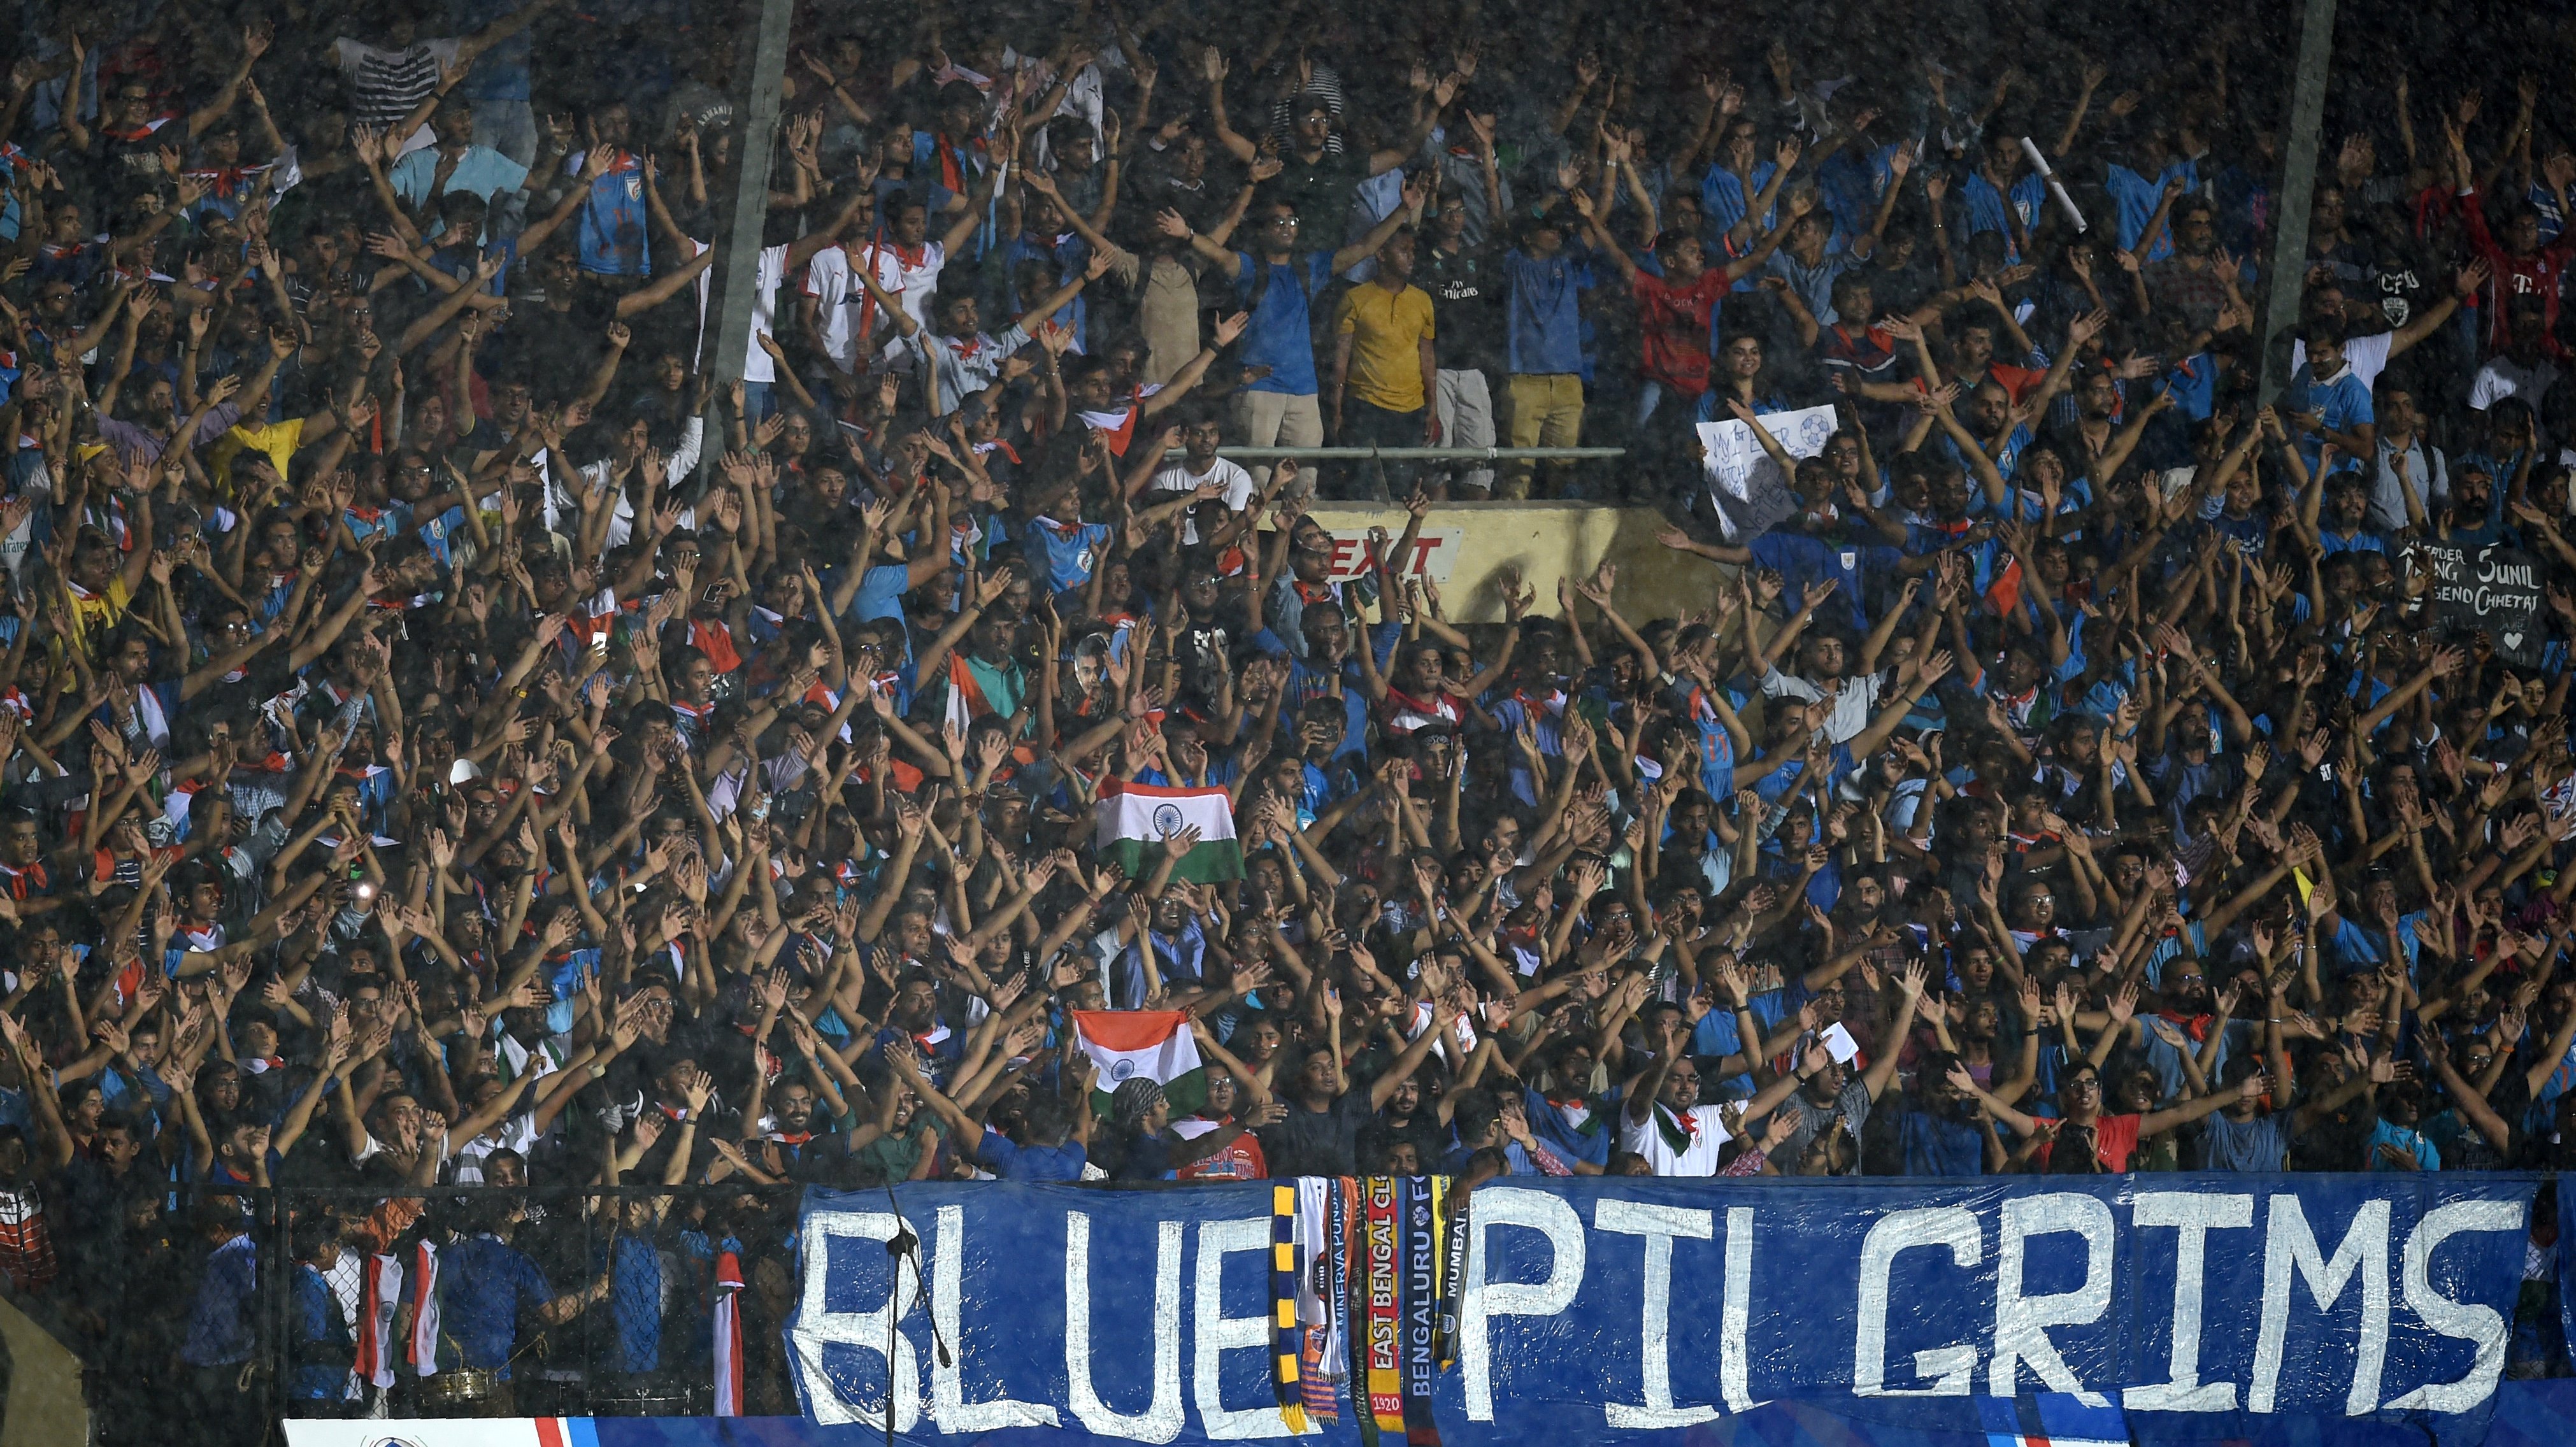 Indian fans attend the Hero Intercontinental Cup football match between India and Kenya in Mumbai on June 4, 2018. - India's football international against Kenya on June 4  was sold out in hours following captain Sunil Chhetri's emotional plea for fans to support the team after barely 2,500 people turned up to watch them play last week. (Photo by PUNIT PARANJPE / AFP)        (Photo credit should read PUNIT PARANJPE/AFP/Getty Images)